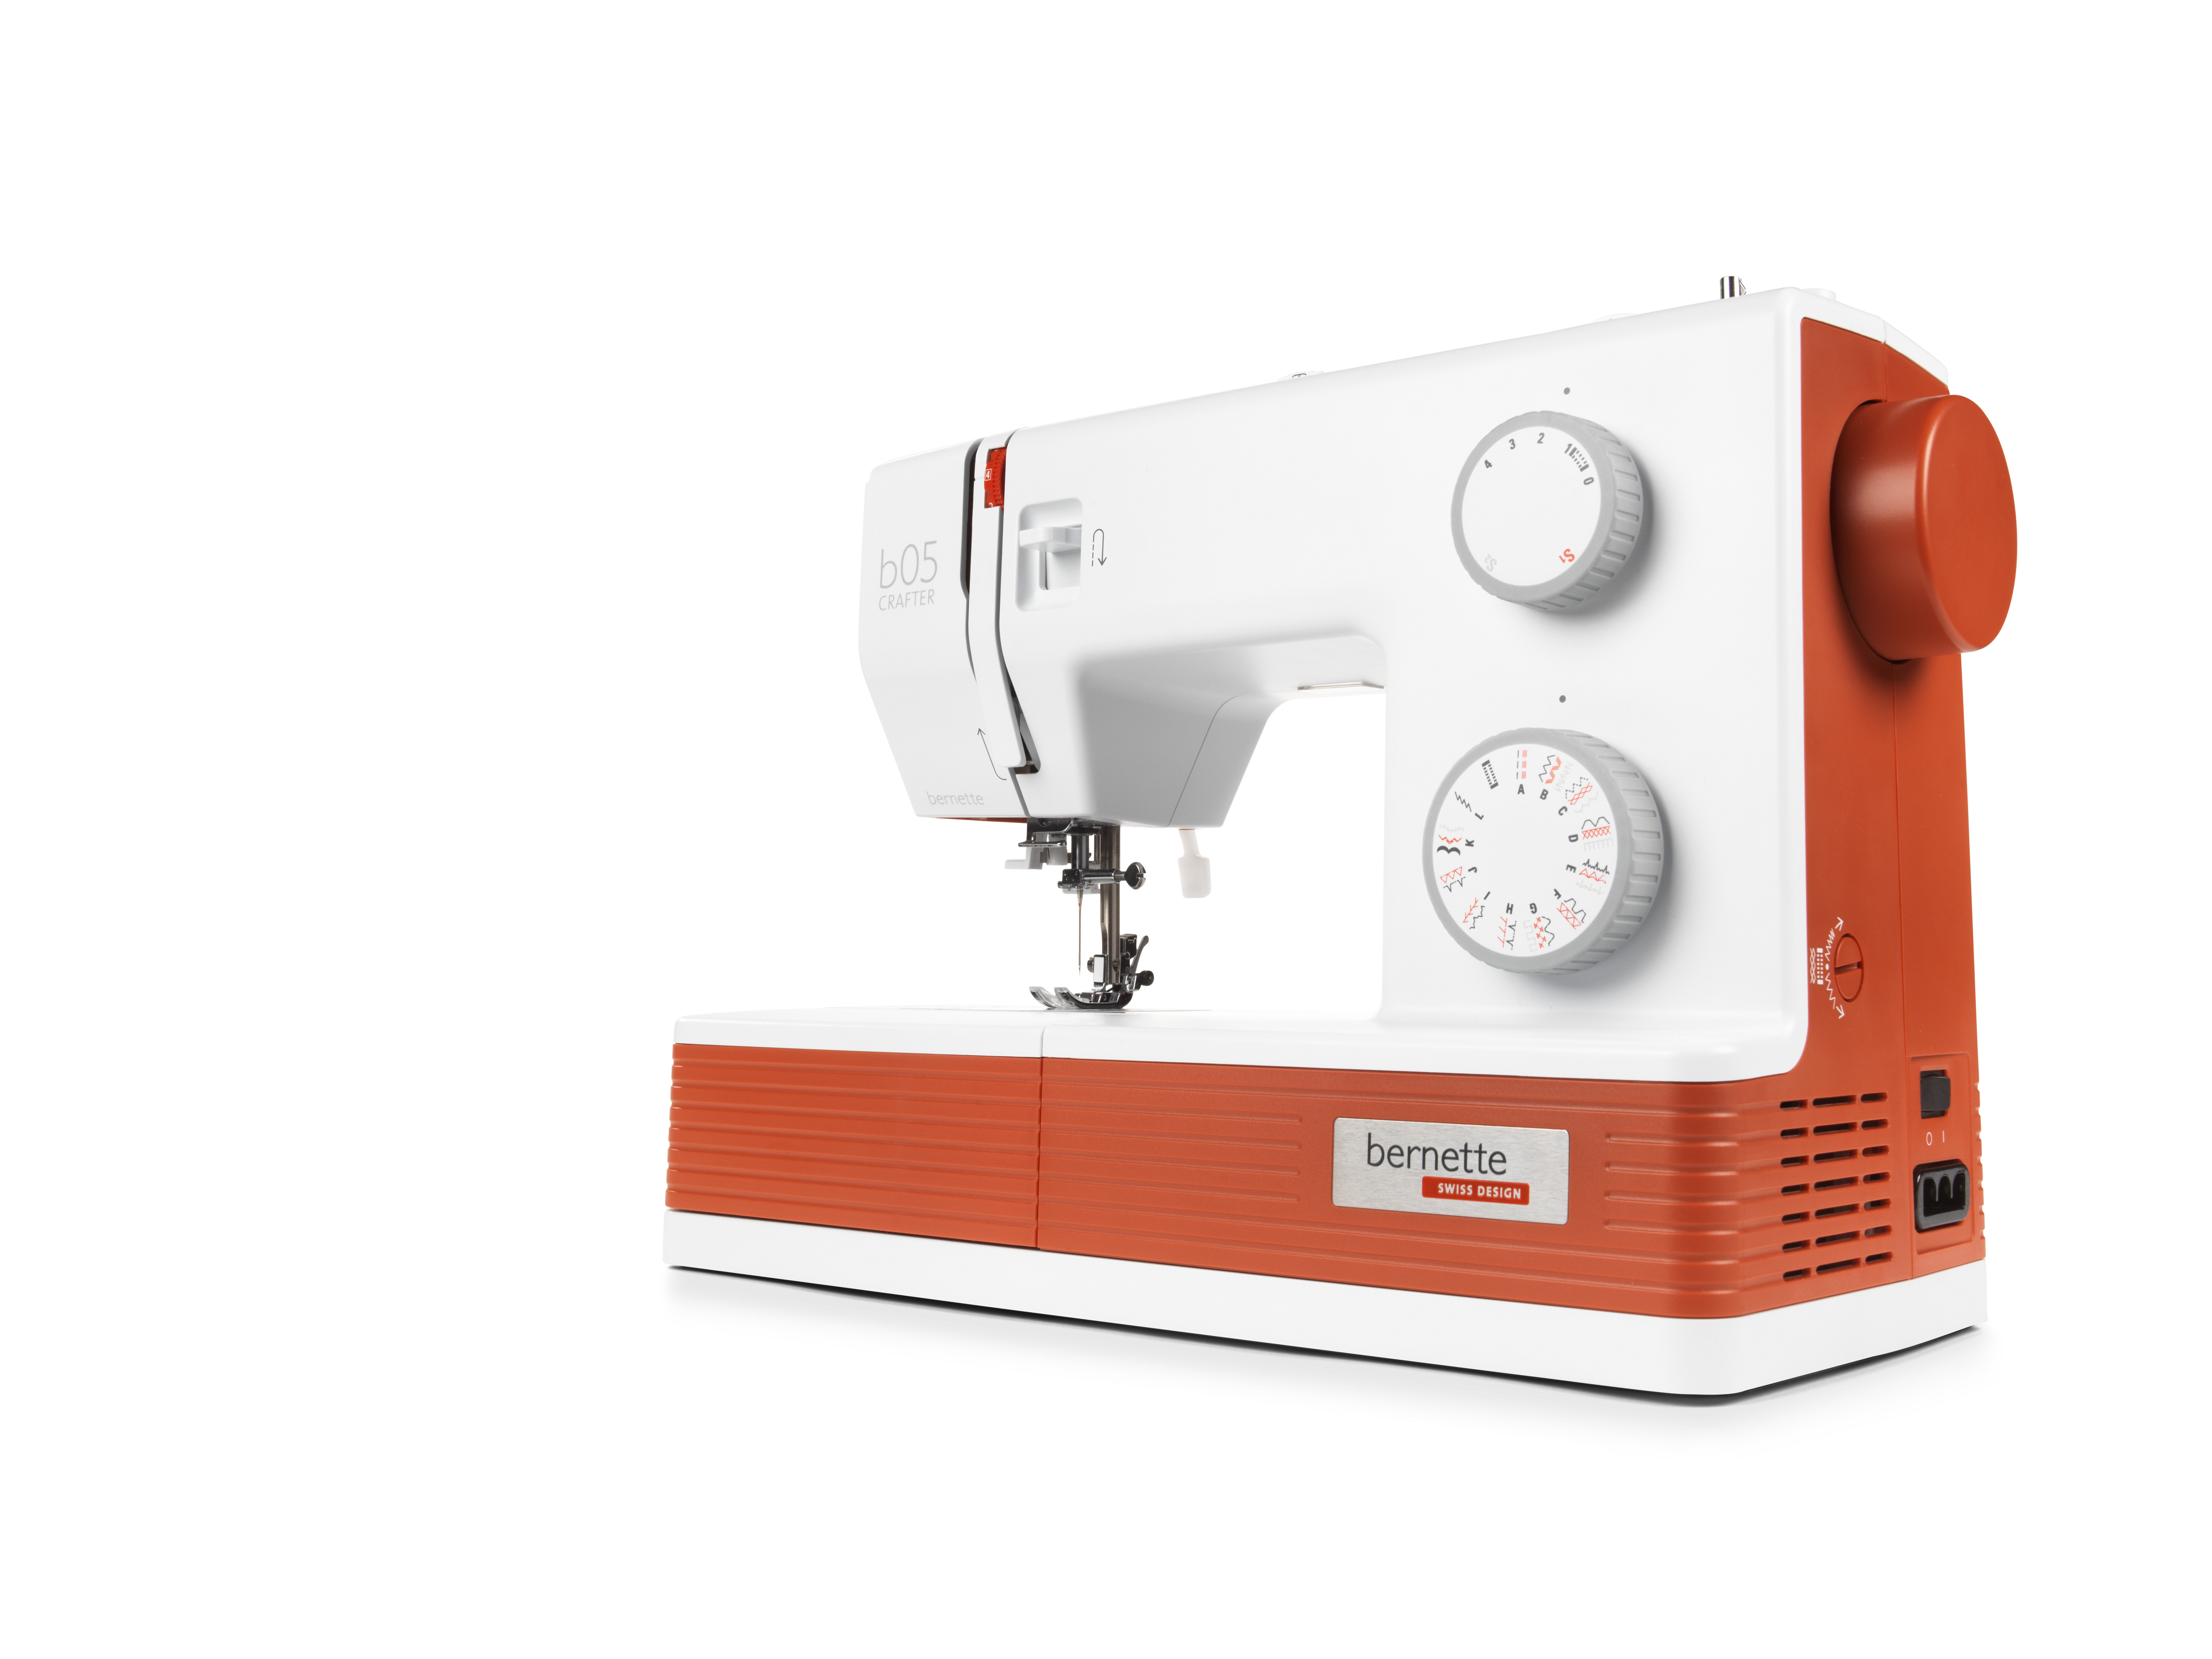 angled image of the Bernette b05 Crafter Sewing Machine